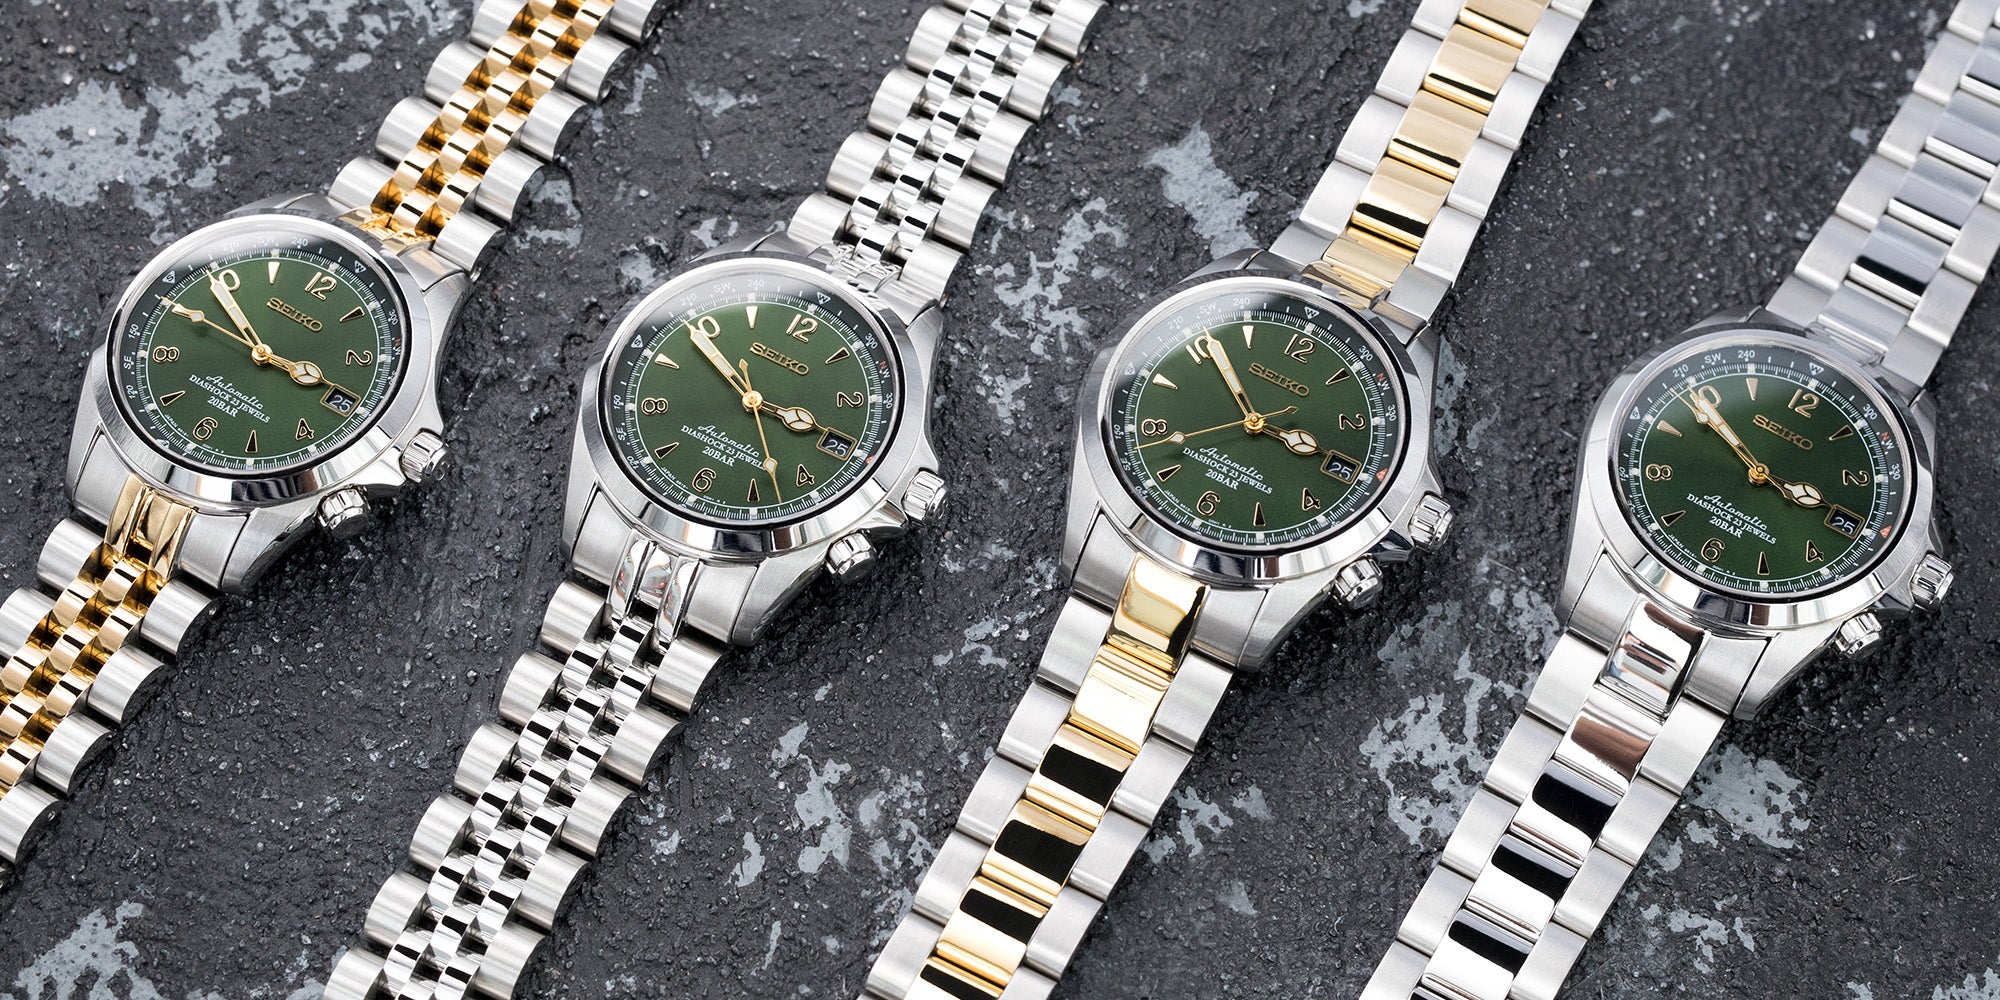 Can the 2020 Seiko Alpinist beat the fame of the original one?– Strapcode